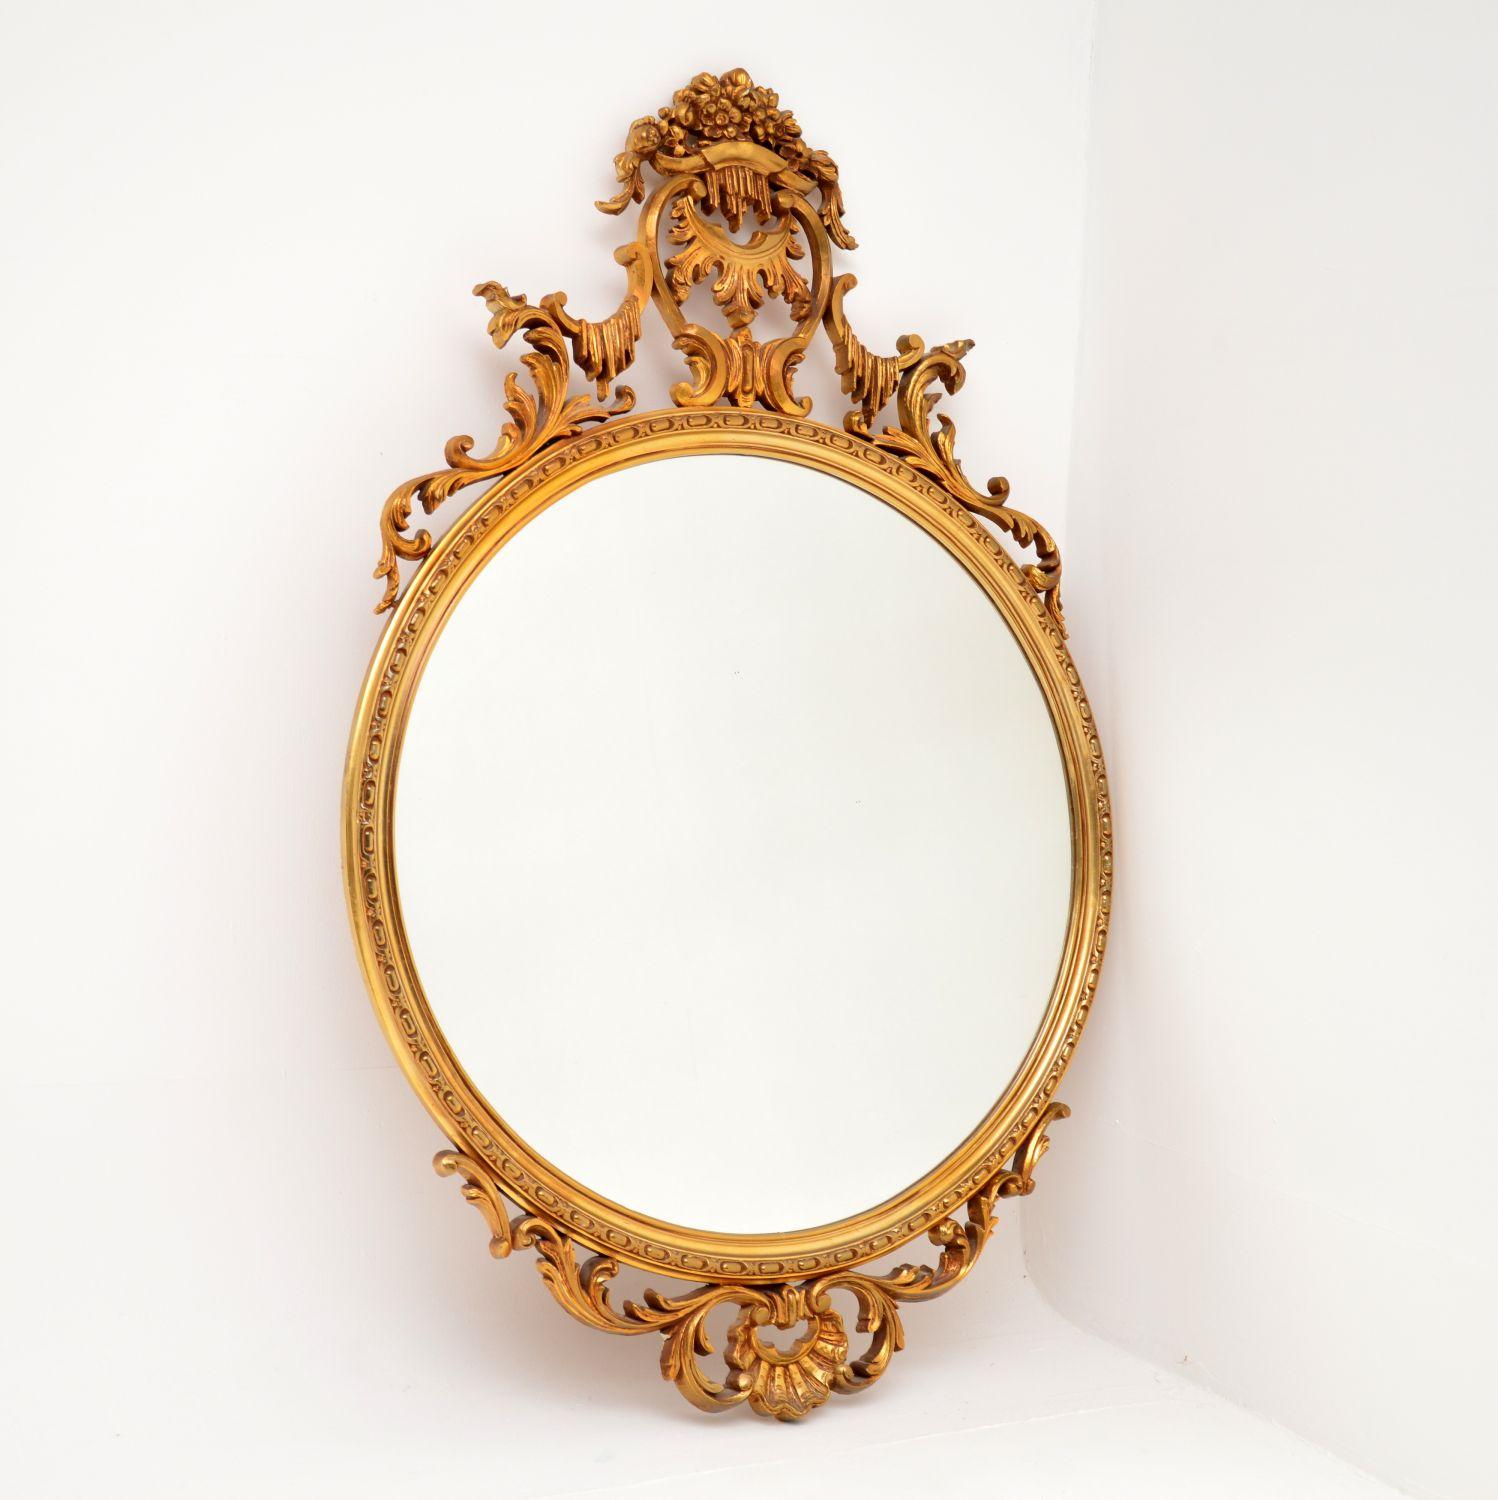 A beautiful and very impressive antique French style mirror. This was actually made in England, it dates from around the 1950-60’s.

The gilt frame has absolutely gorgeous and intricate motifs throughout. It is of lovely quality and is made from a